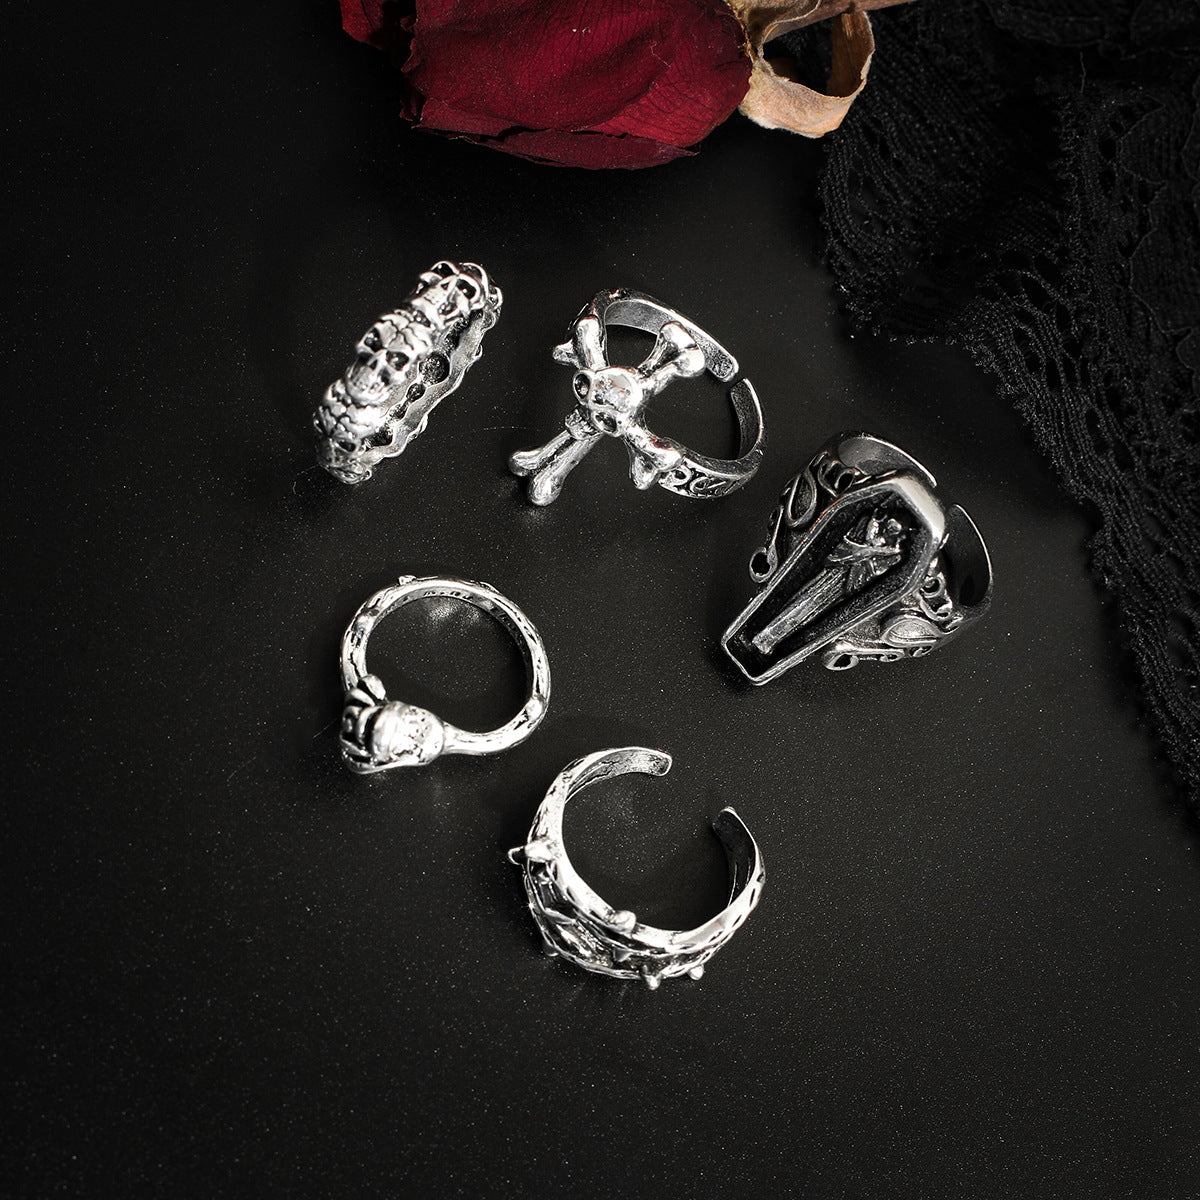 Halloween Bat and Snake Ring Set with Dark Gothic Flair